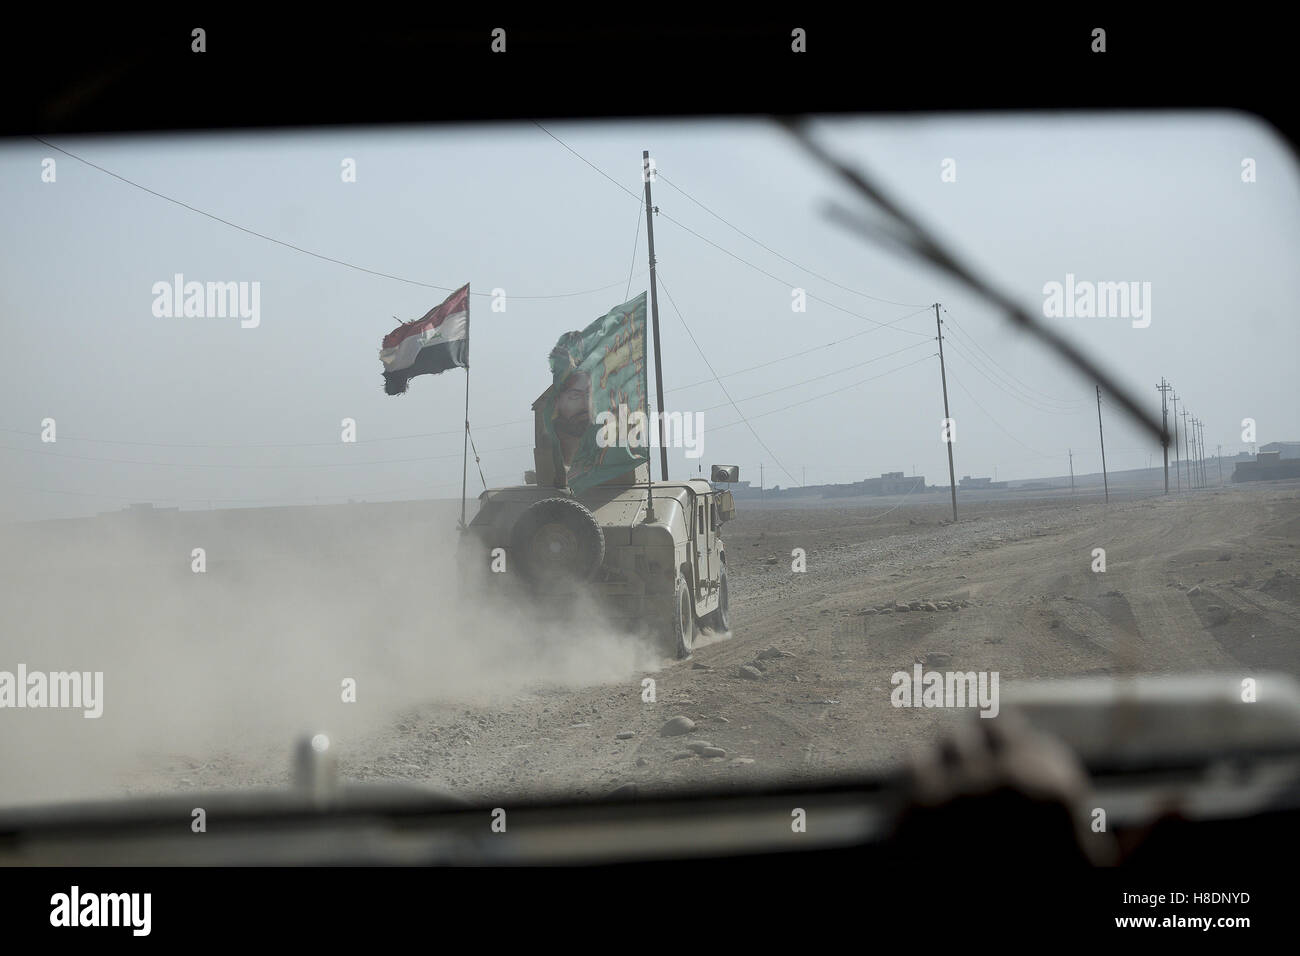 Mosul, Nineveh, Iraq. 11th Nov, 2016. 11/11/2016. Mosul, Iraq. Seen through an armoured windscreen an Iraqi Army armoured Humvee, flying Shia and Iraqi national flags and belonging to the Iraqi Army's 9th Armoured Division, drives along a track on the outskirts of Mosul, Iraq. Credit:  ZUMA Press, Inc./Alamy Live News Stock Photo